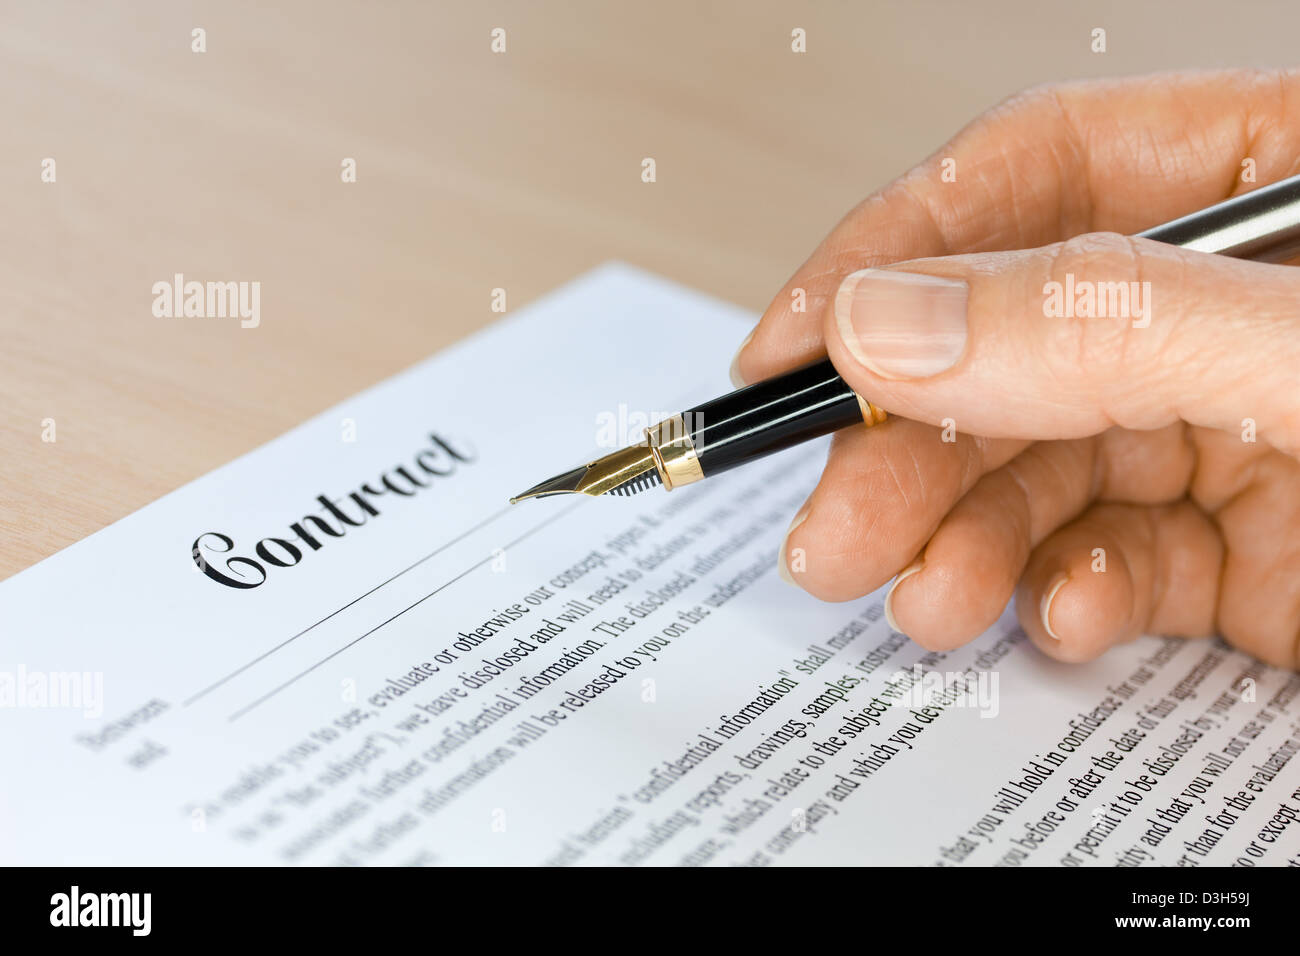 Hand with Fountain Pen Signing a Contract Stock Photo